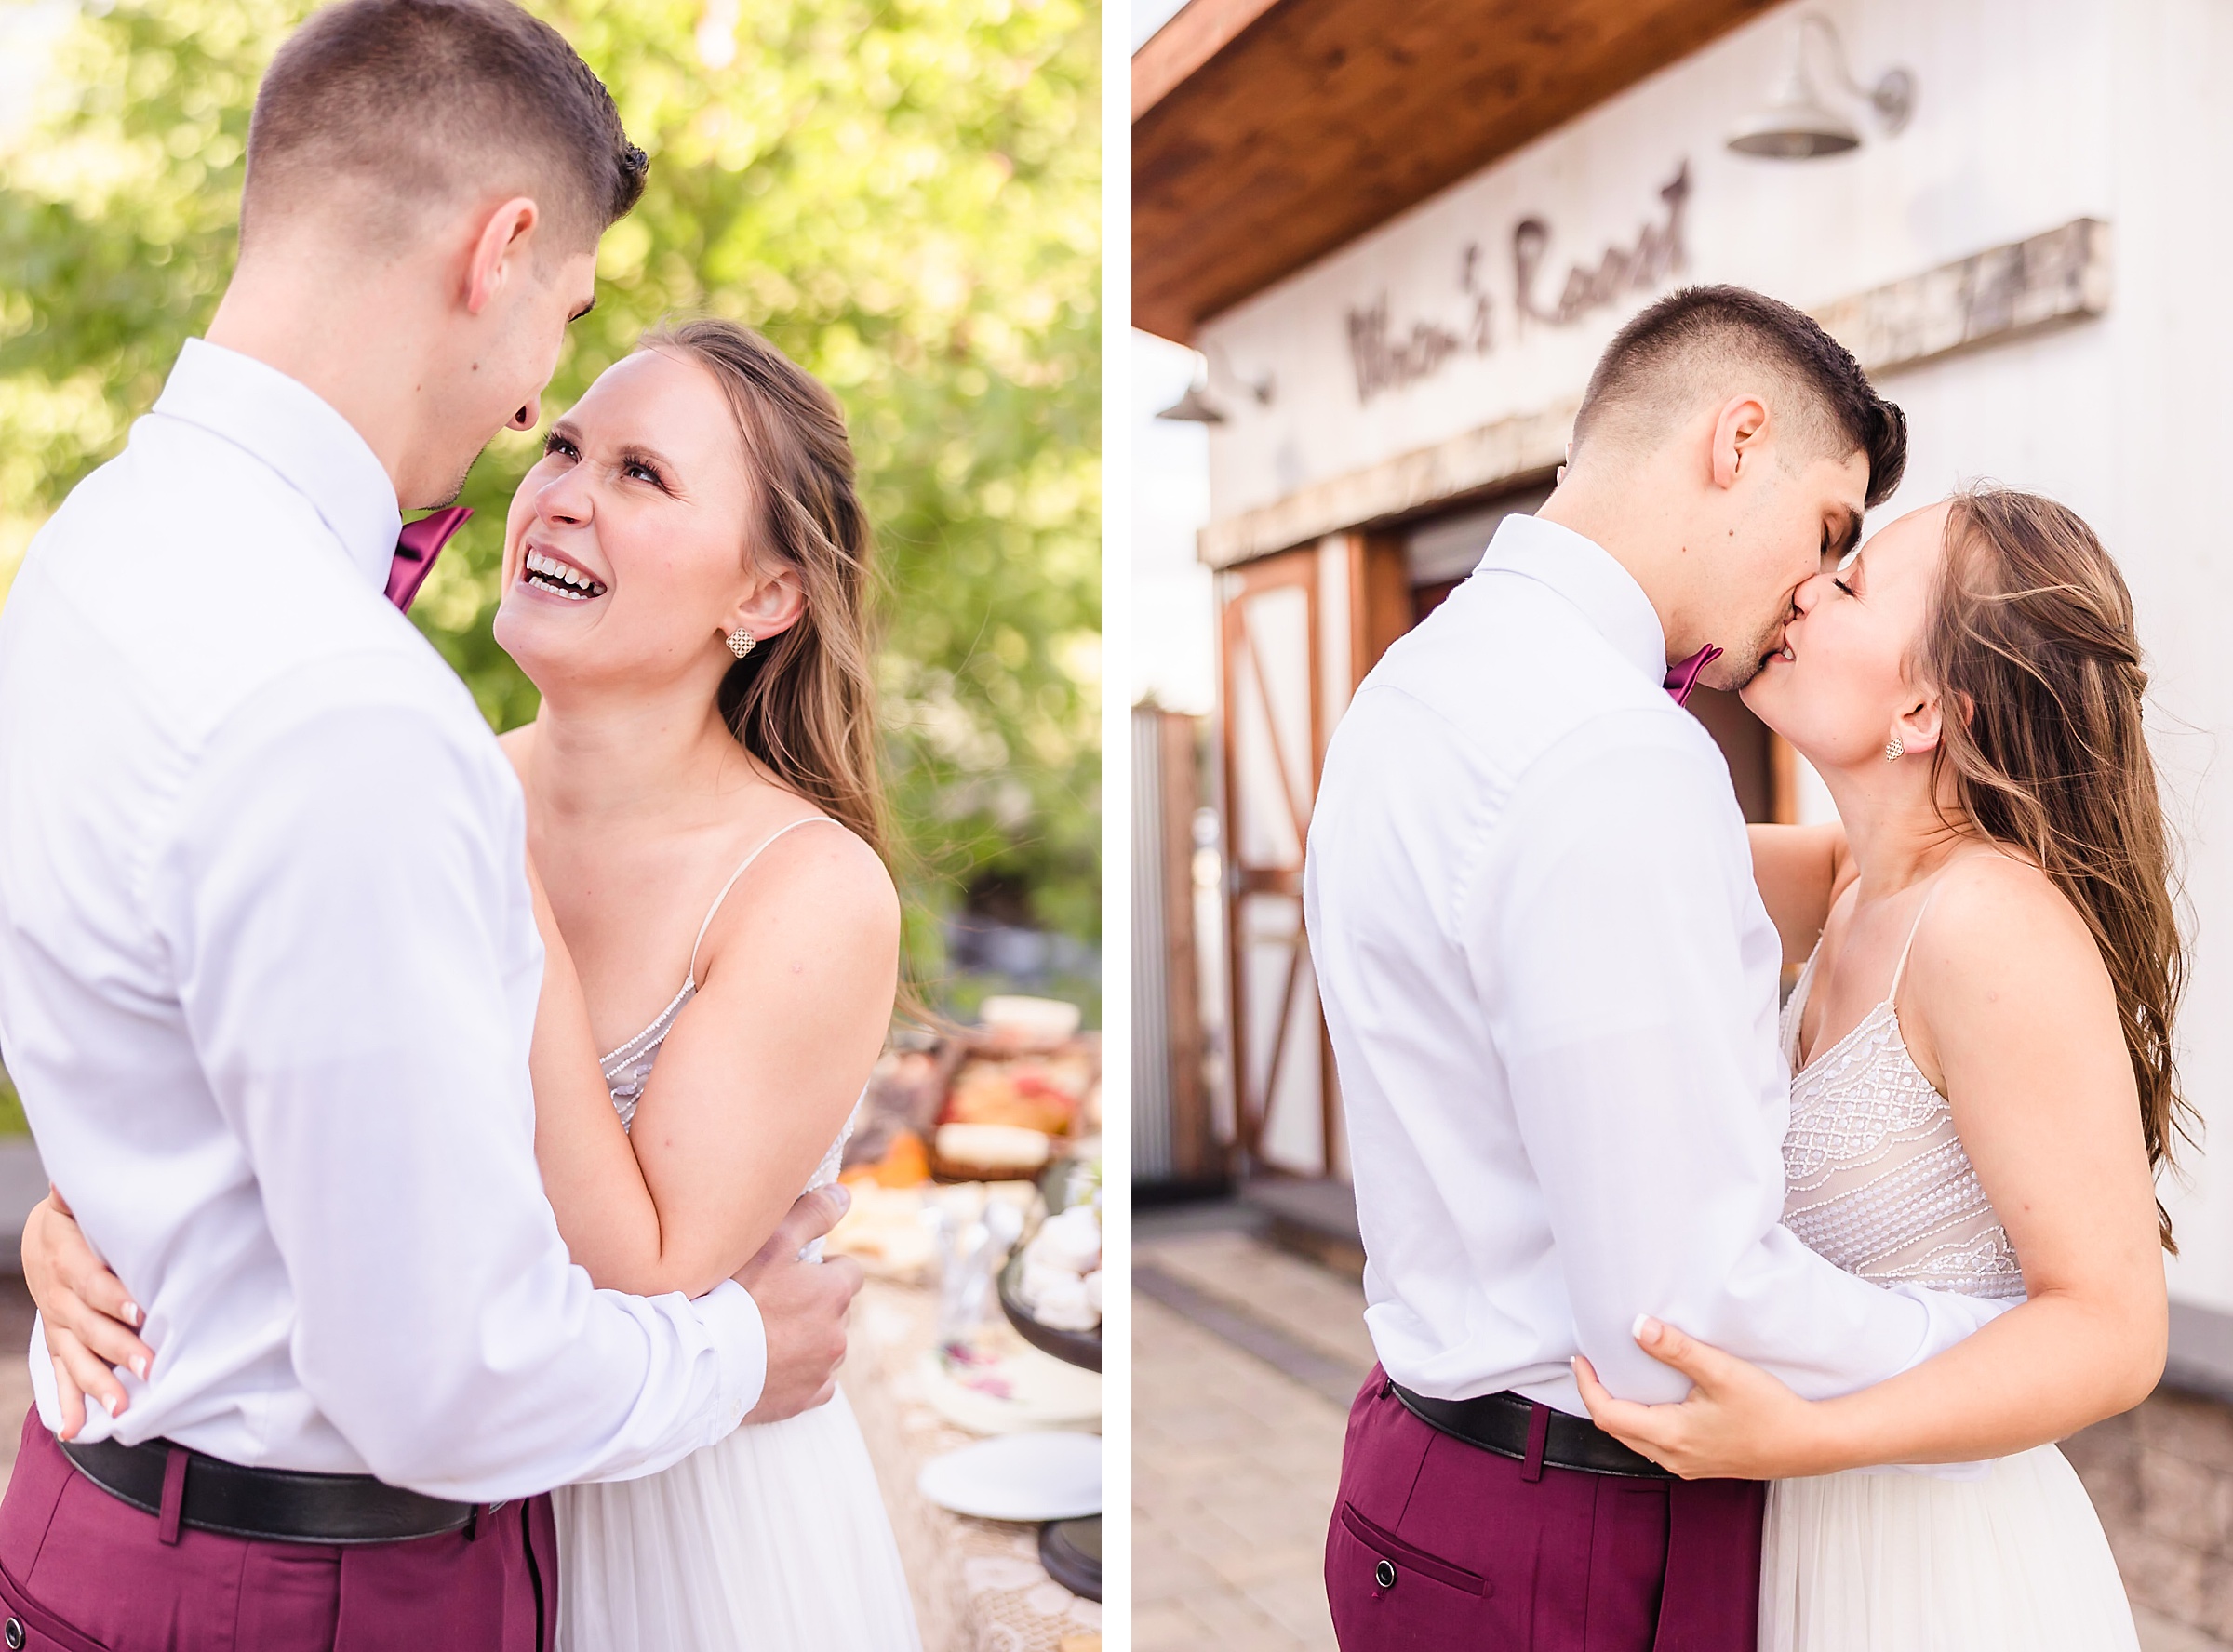  Bride & Groom celebrate getting married at the Wren's Roost Barn Venue in Naples, New York.